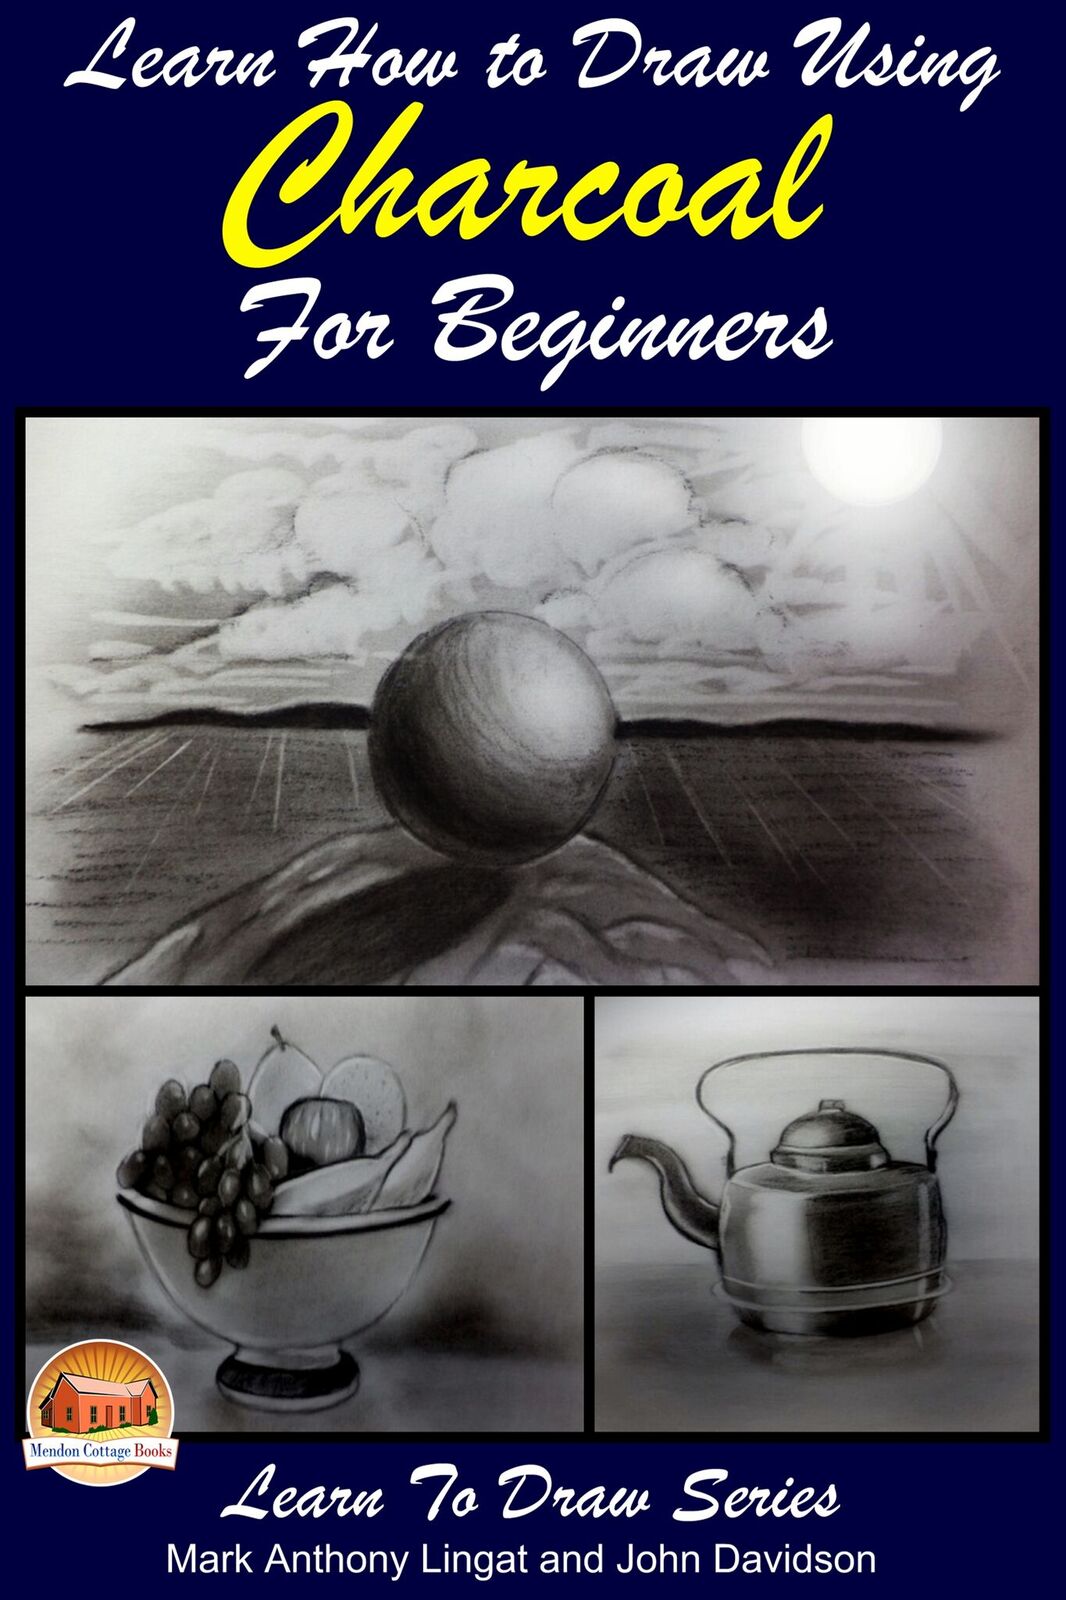 Learn How to Draw Using Charcoal for Beginners – Learn to Draw Books